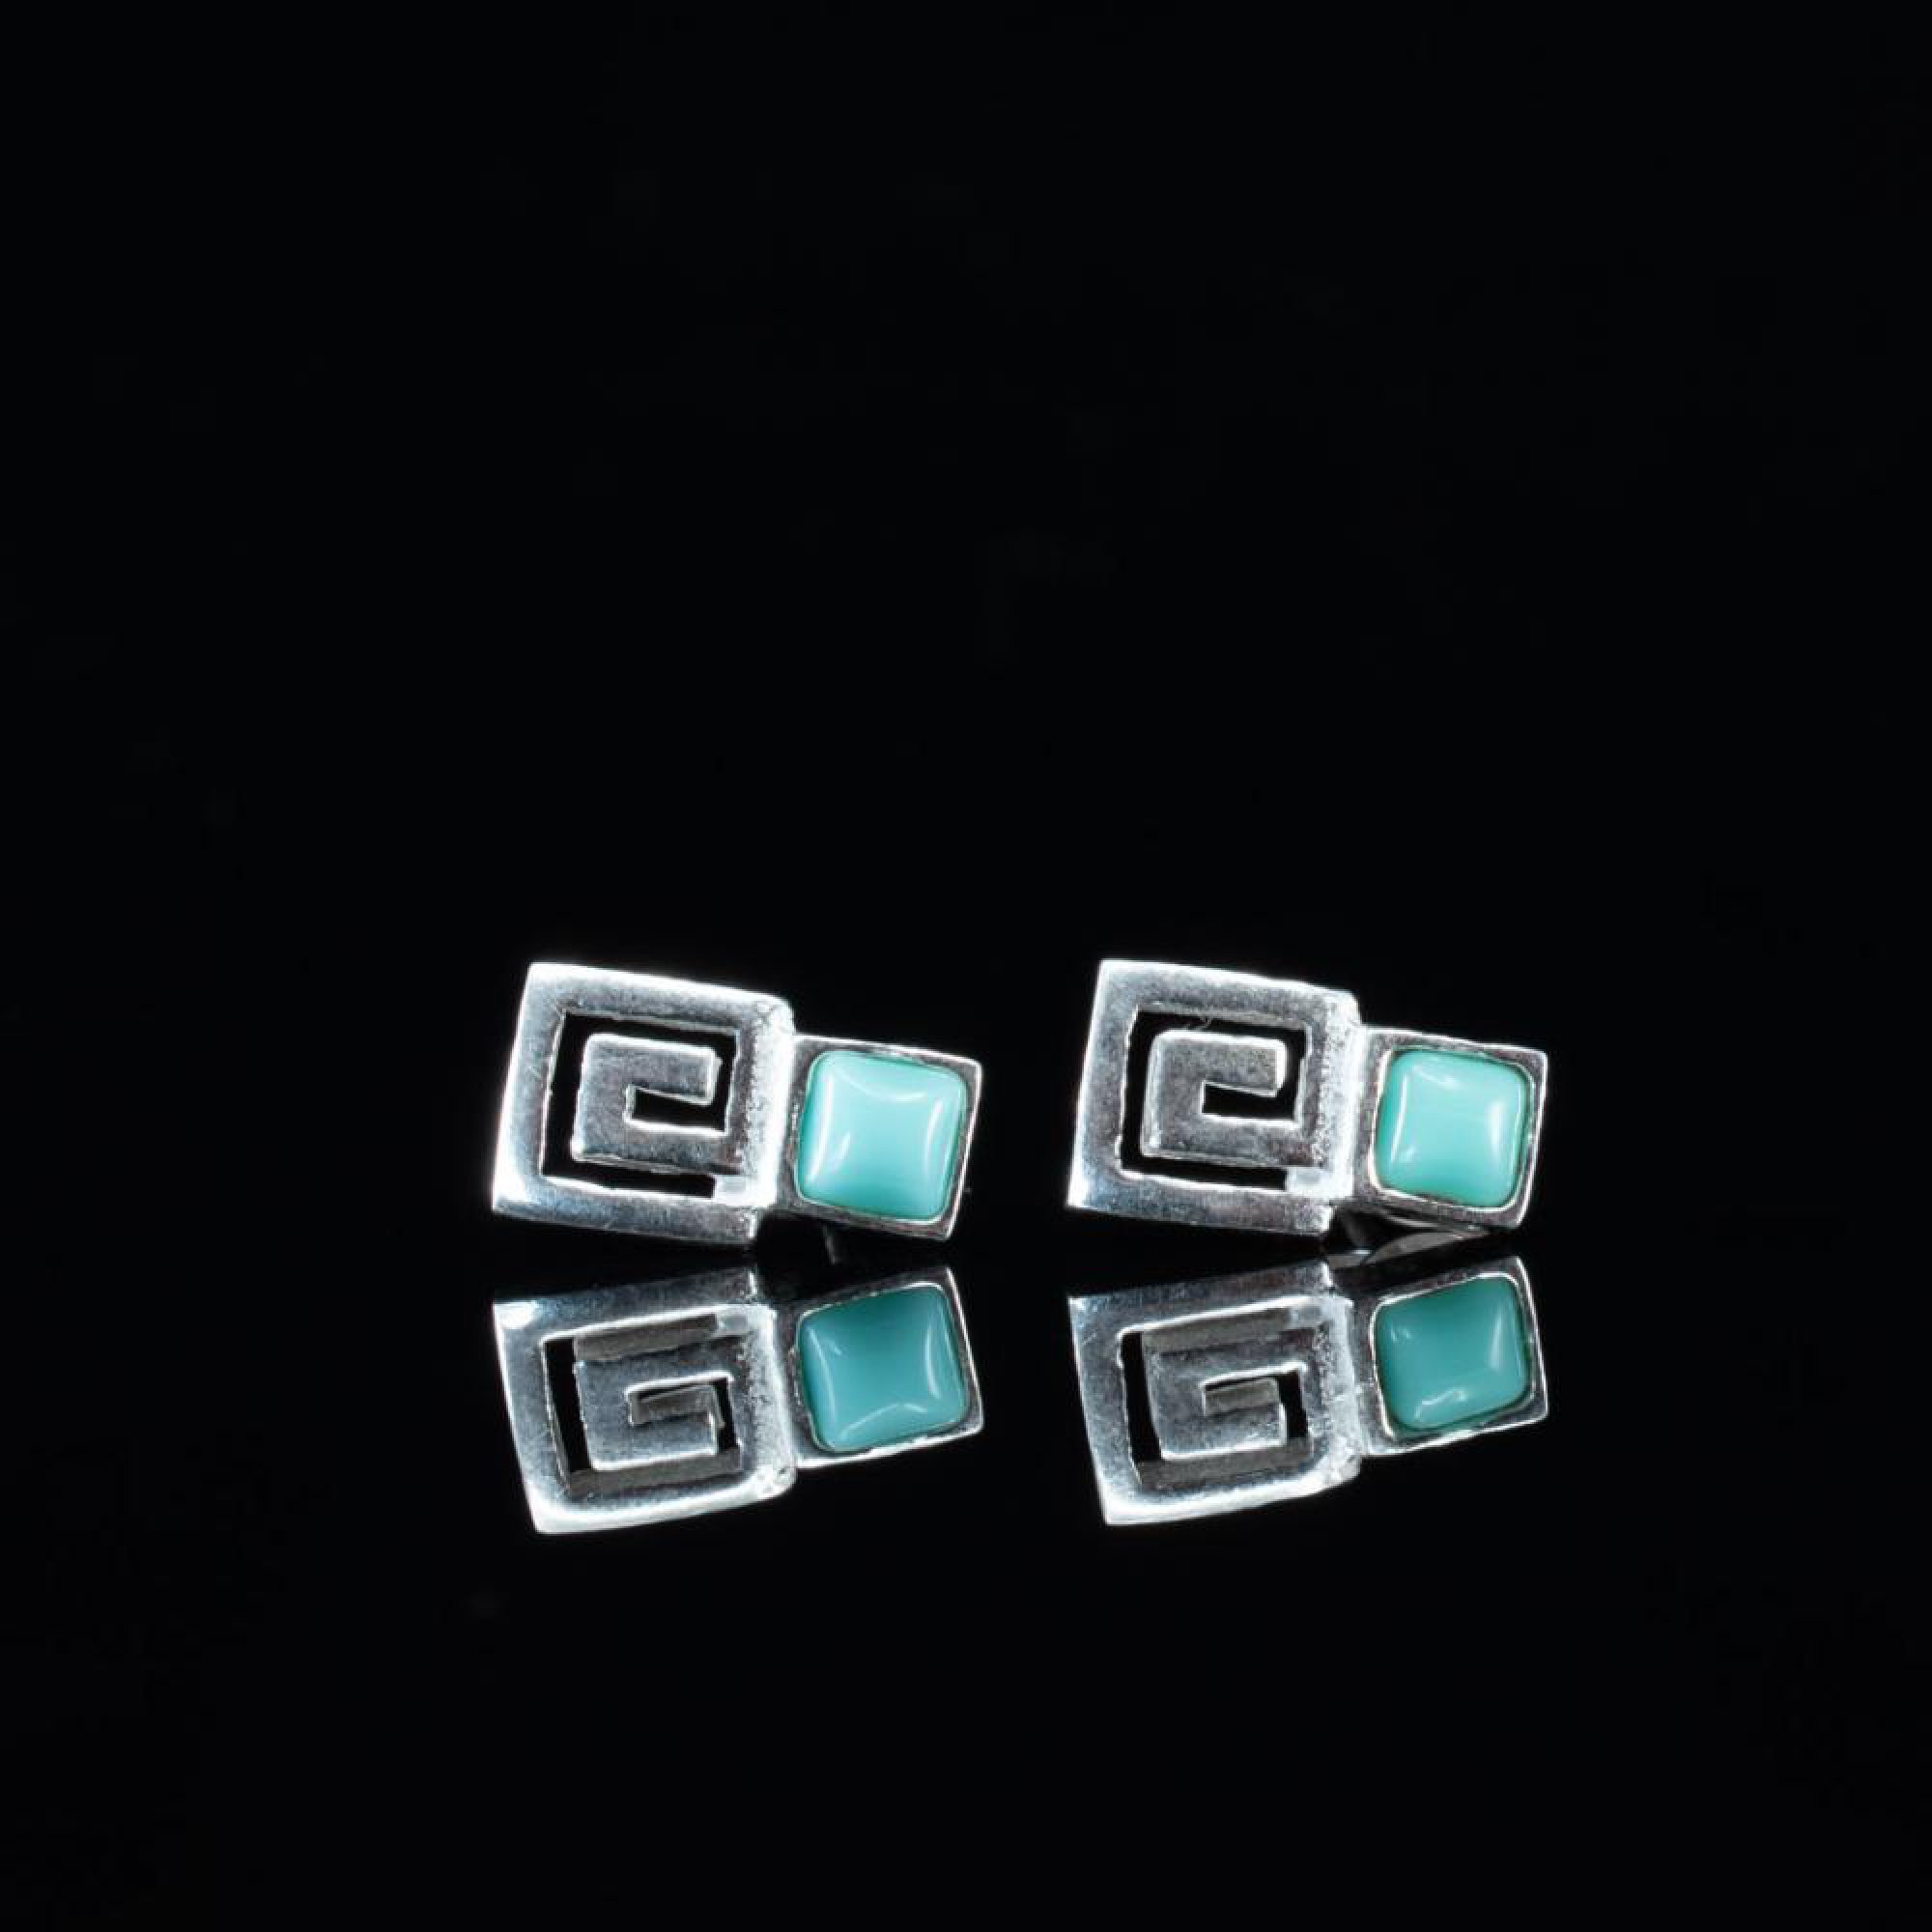 Meander earrings with turquoise stones